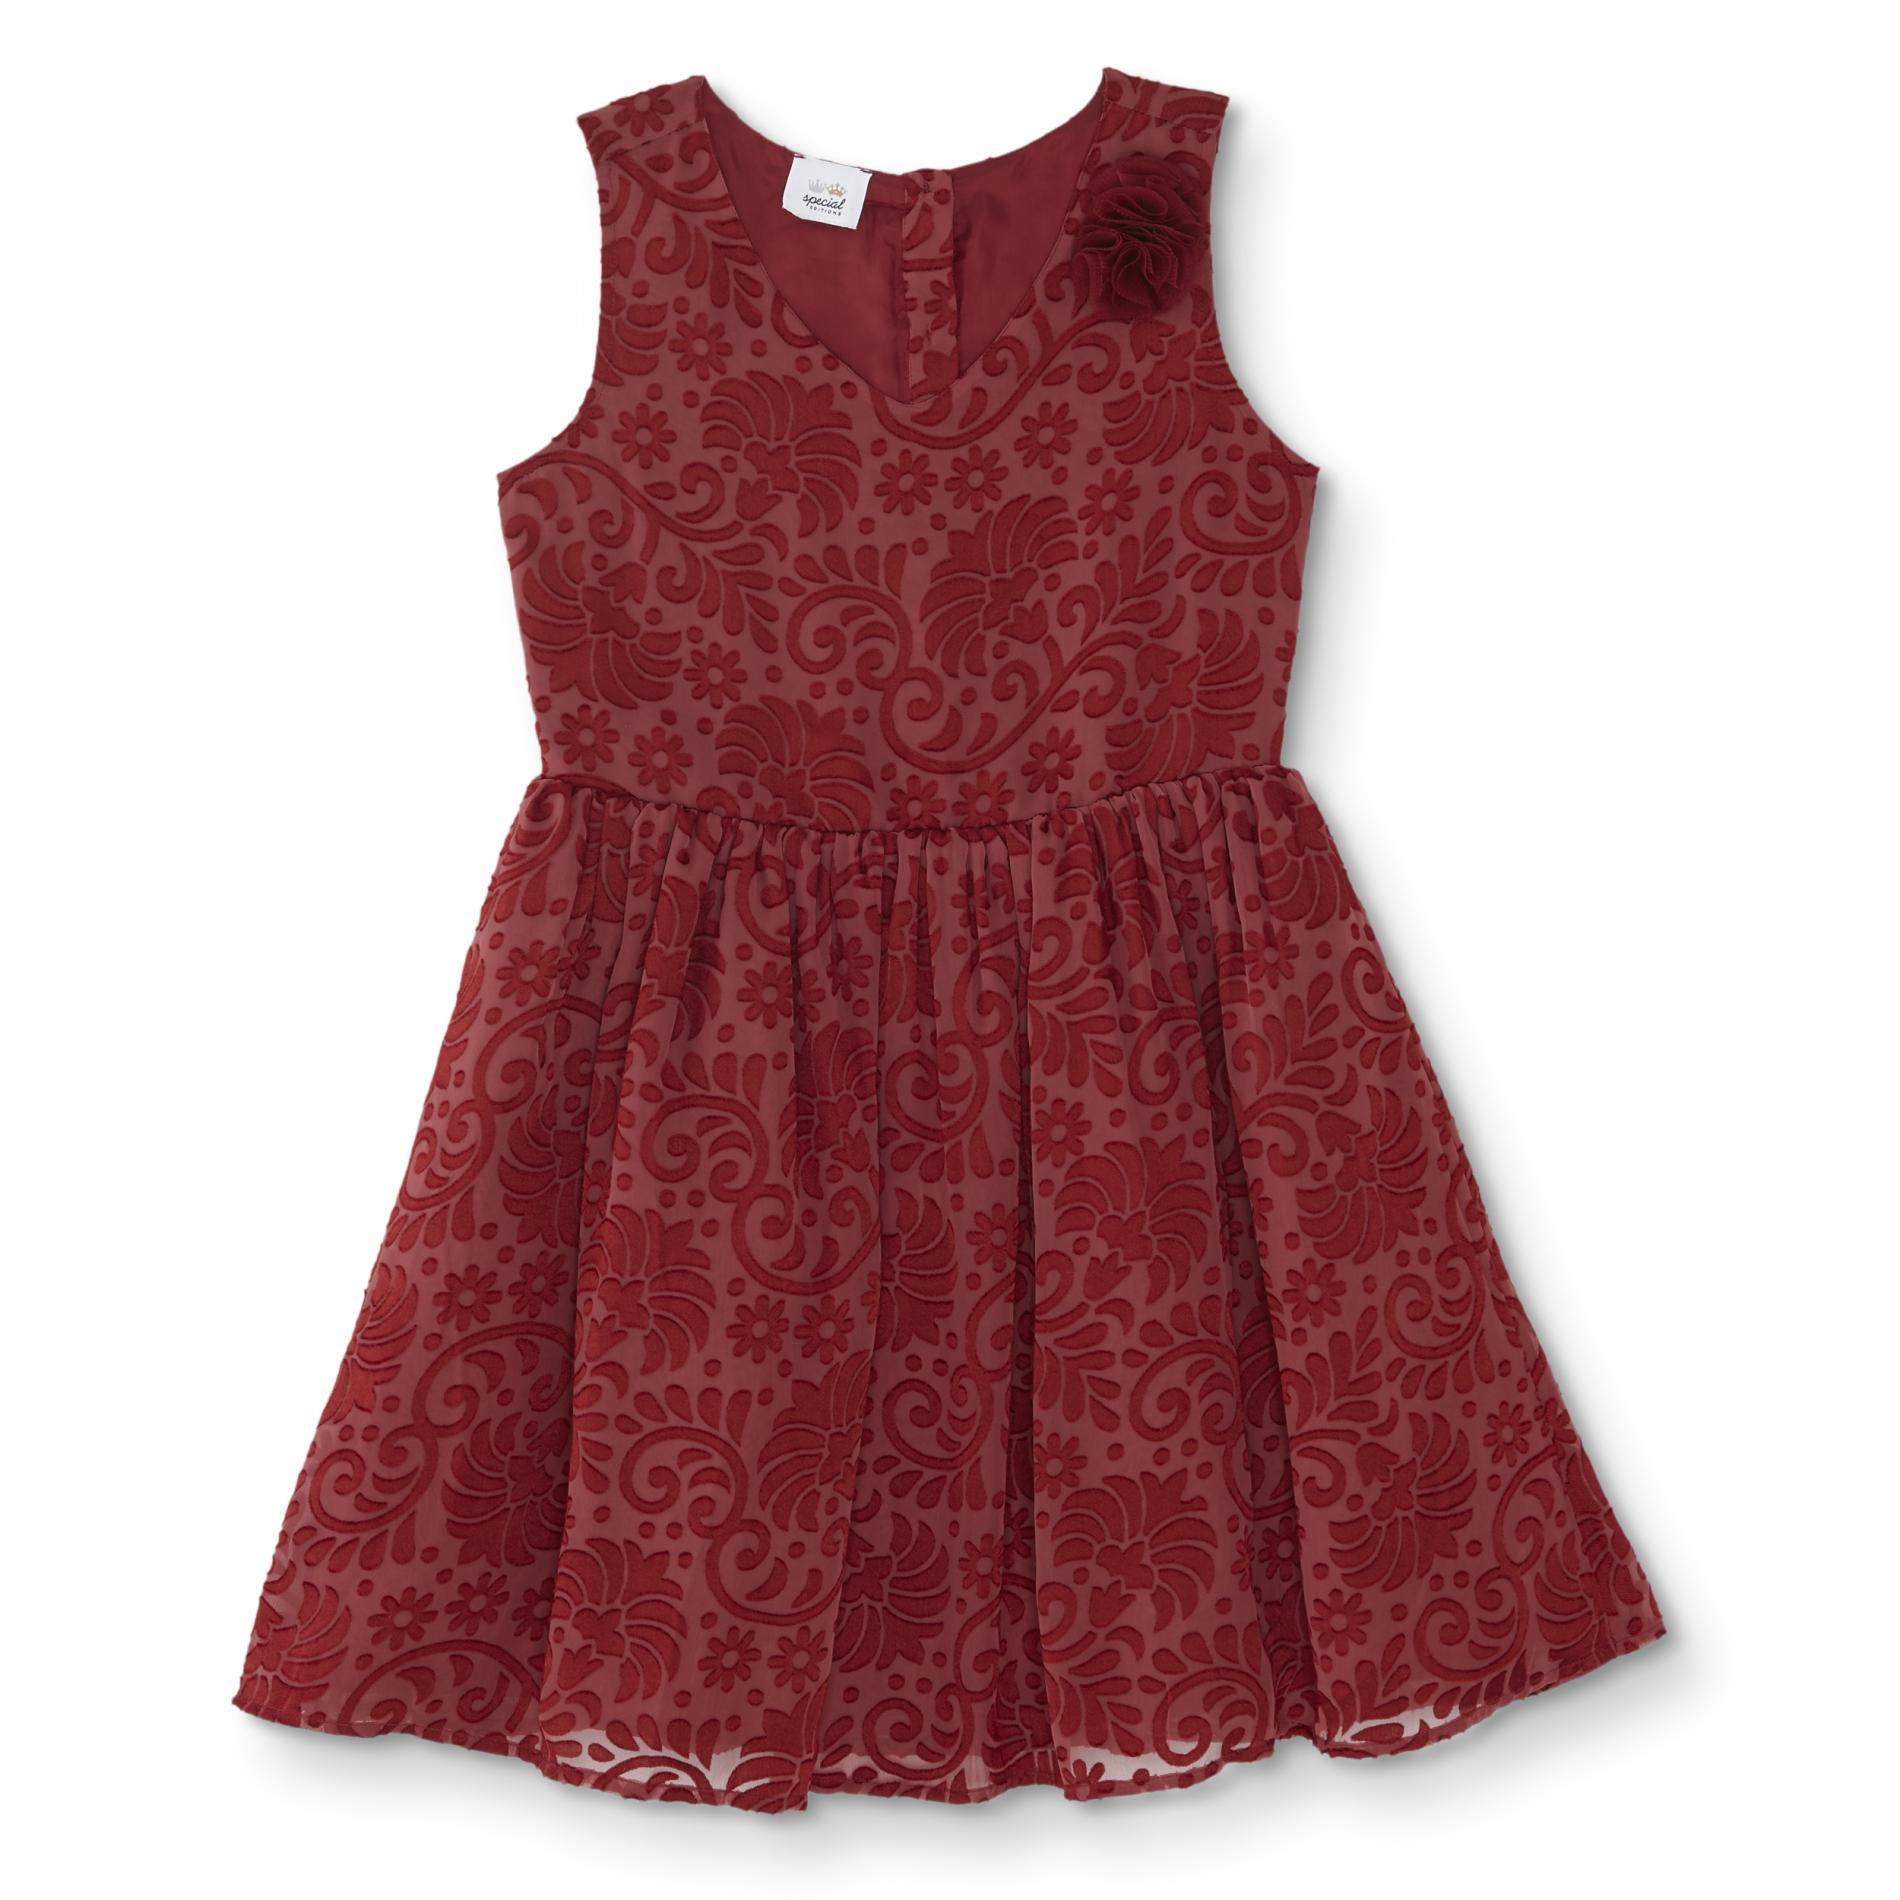 Special Editions Infant & Toddler Girls' Sleeveless Occasion Dress